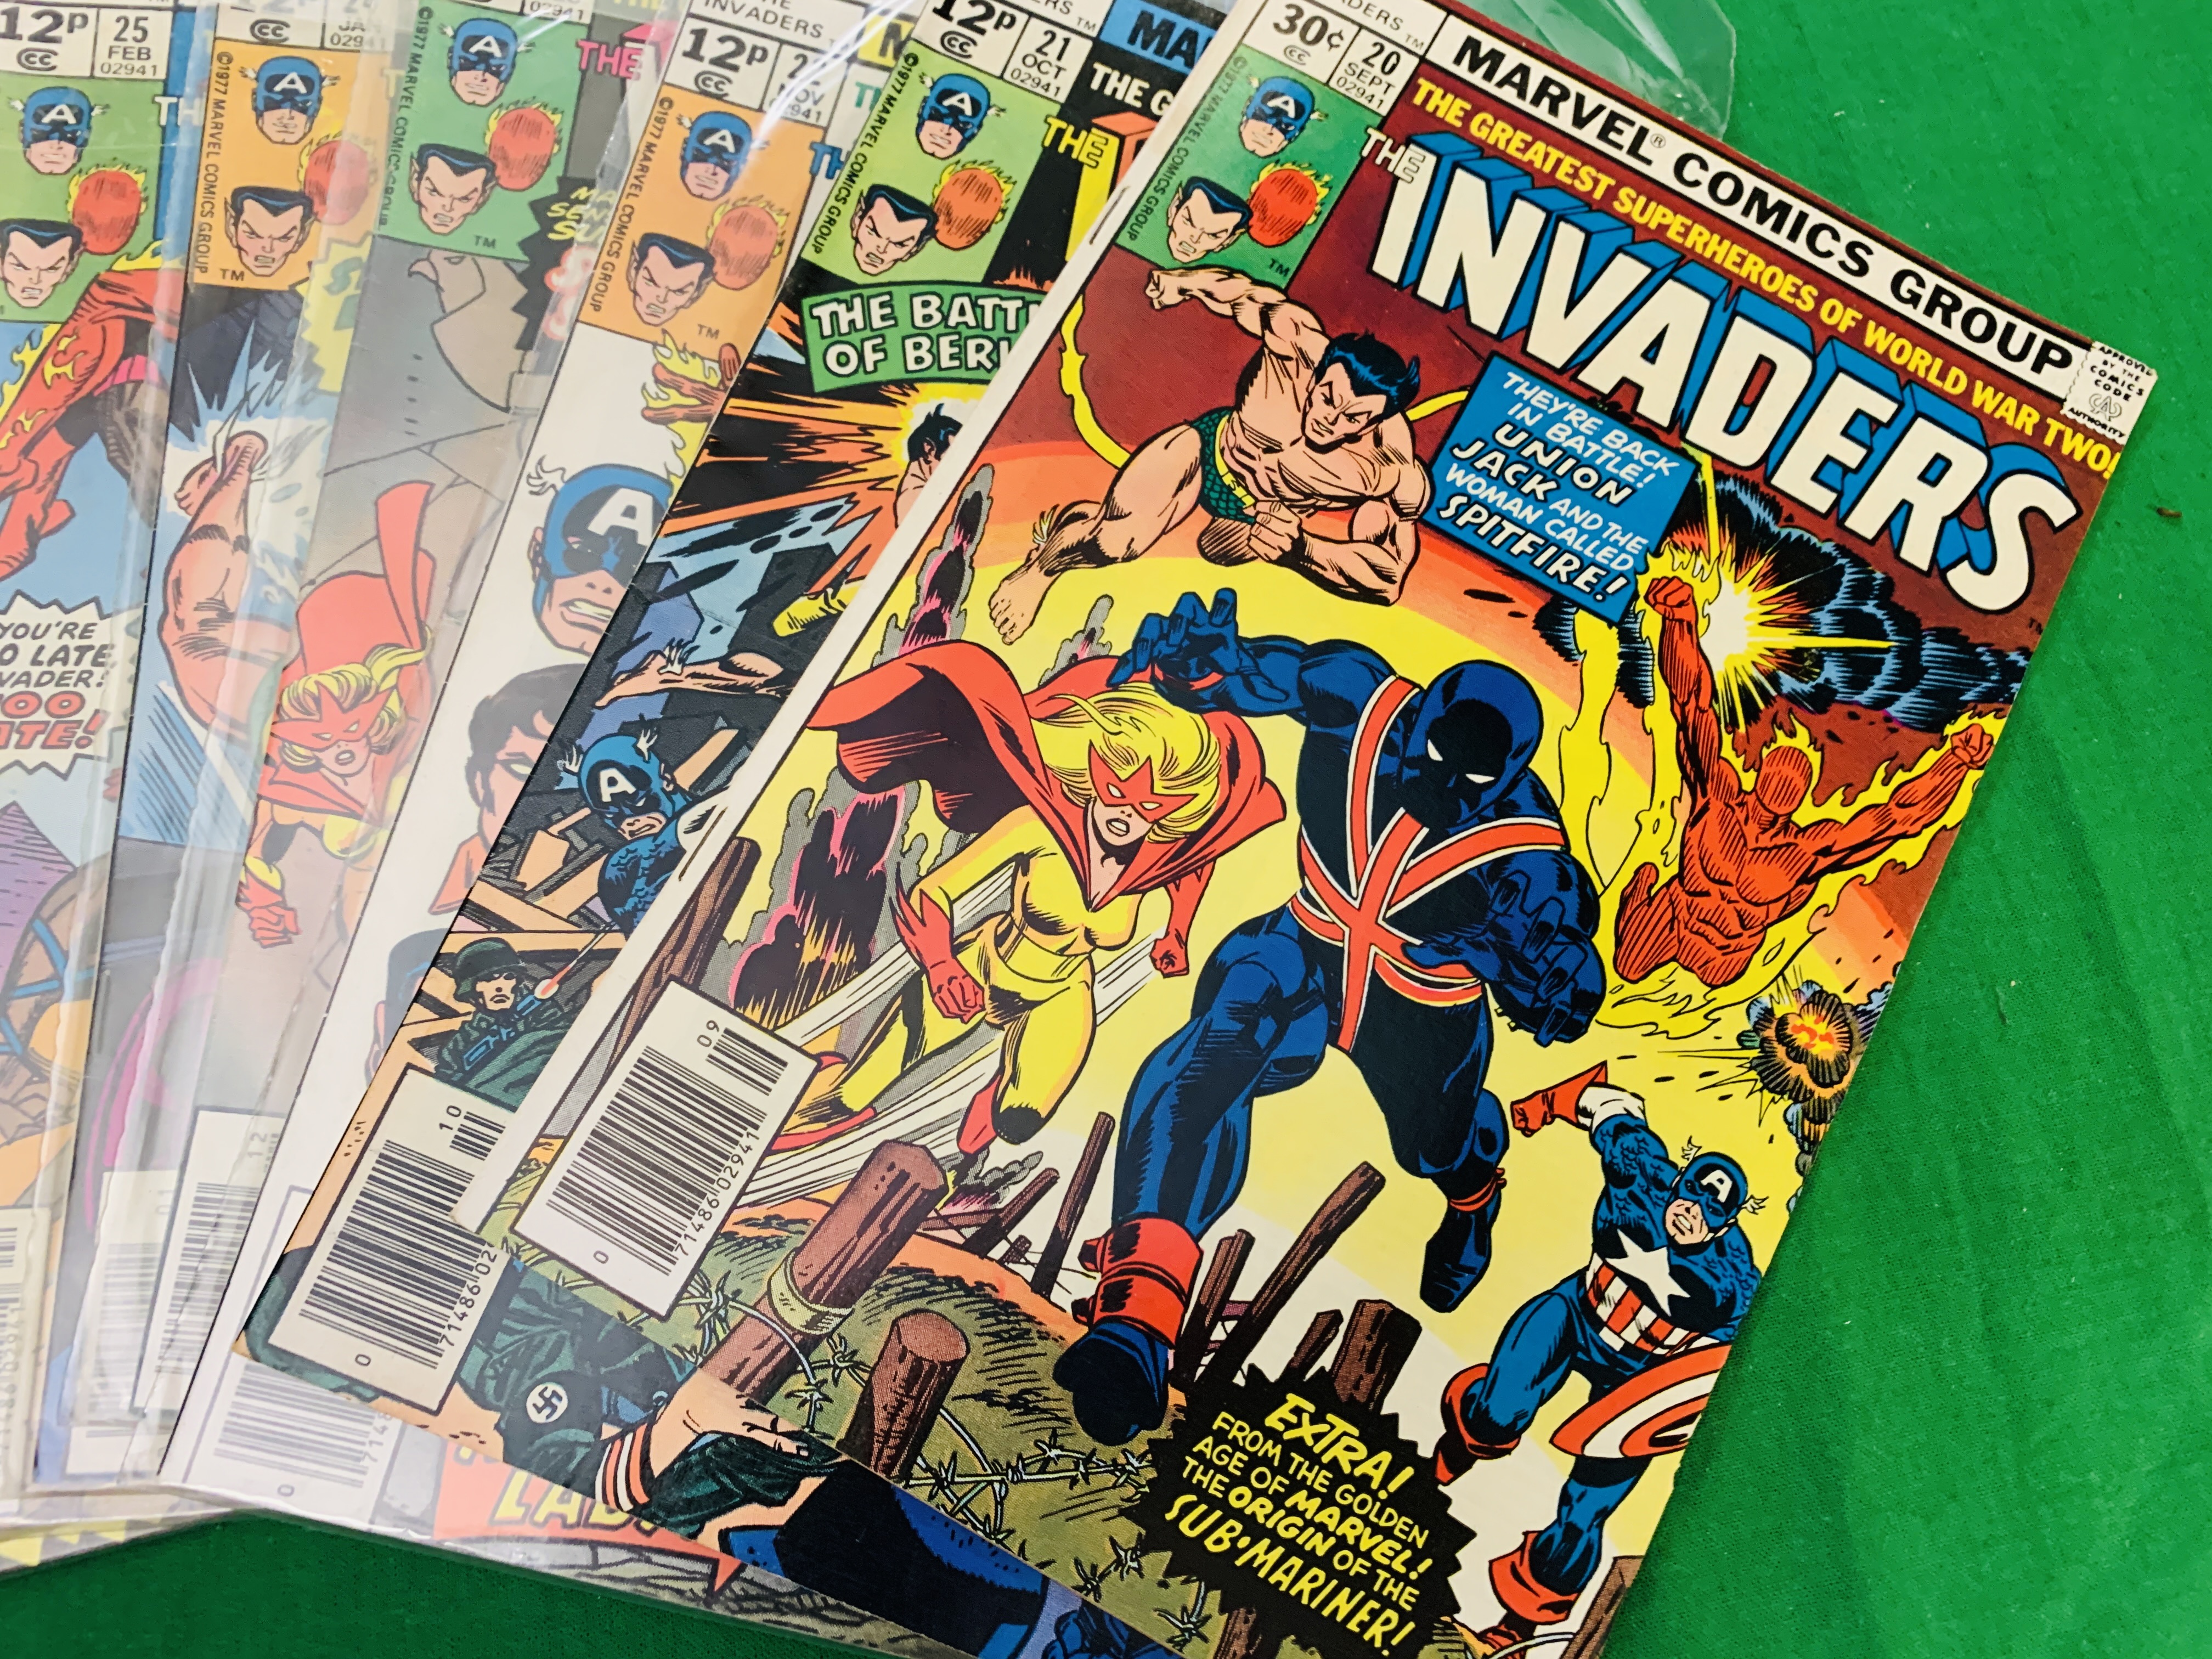 MARVEL COMICS THE INVADERS NO. 1 - 41 FROM 1975. FIRST APPEARANCE NO 7. - Image 8 of 12